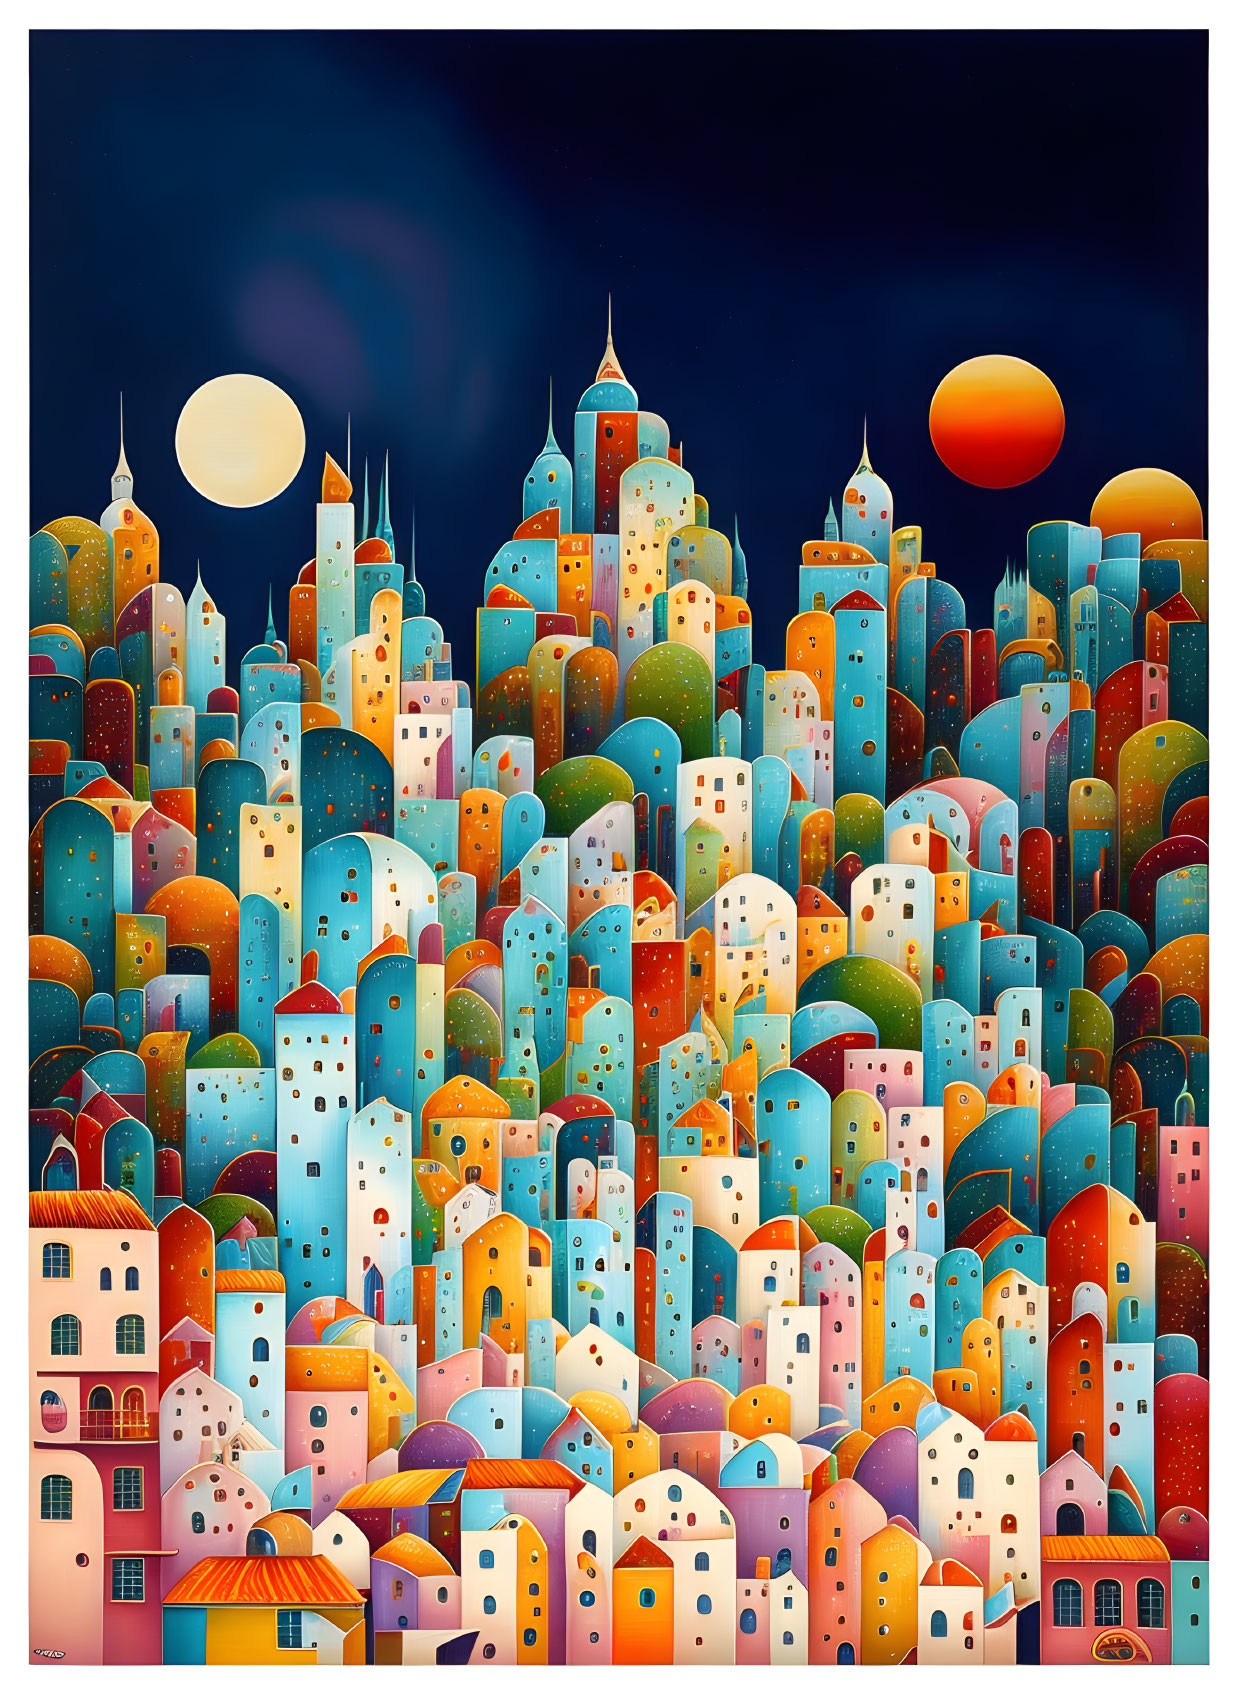 Vibrant cityscape with whimsical buildings and dual moons and sun